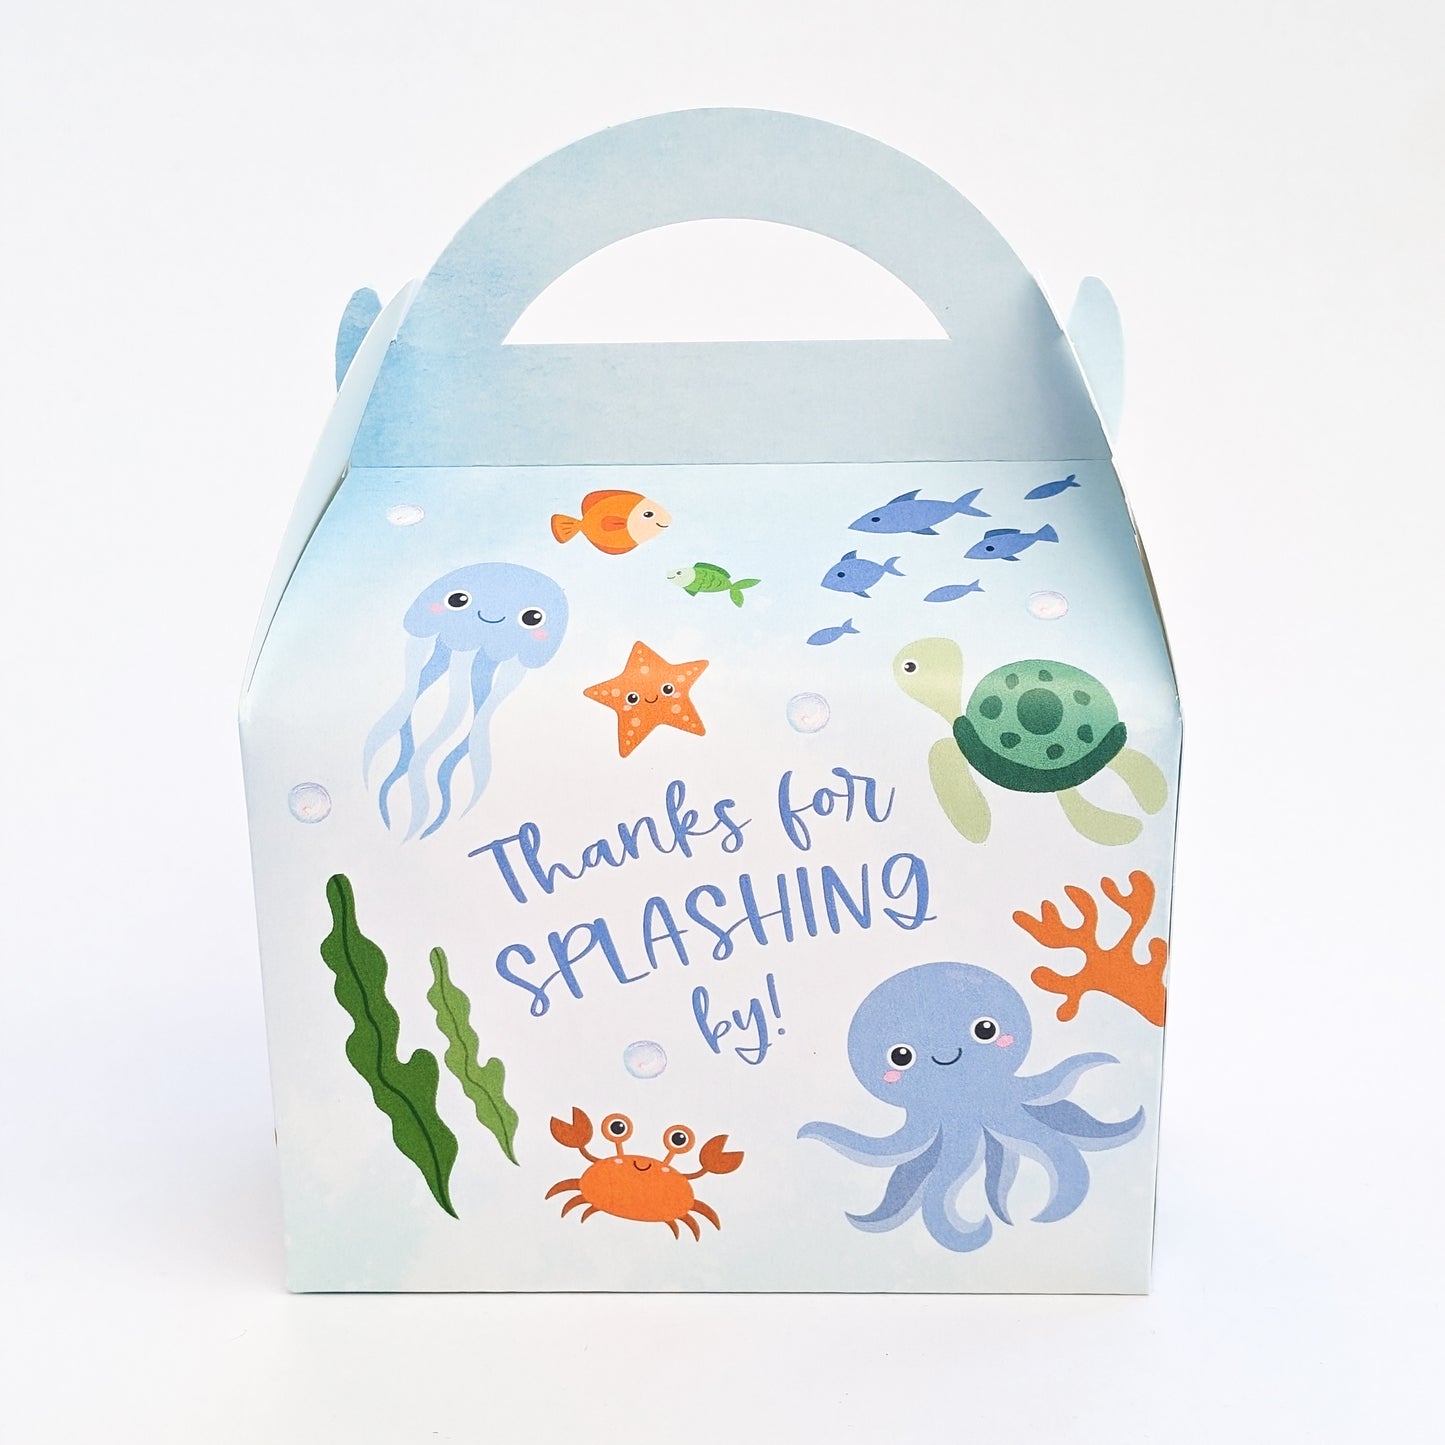 Under the Sea Seaside Ocean Underwater Ofishally  Personalised Children’s Party Box Gift Bag Favour